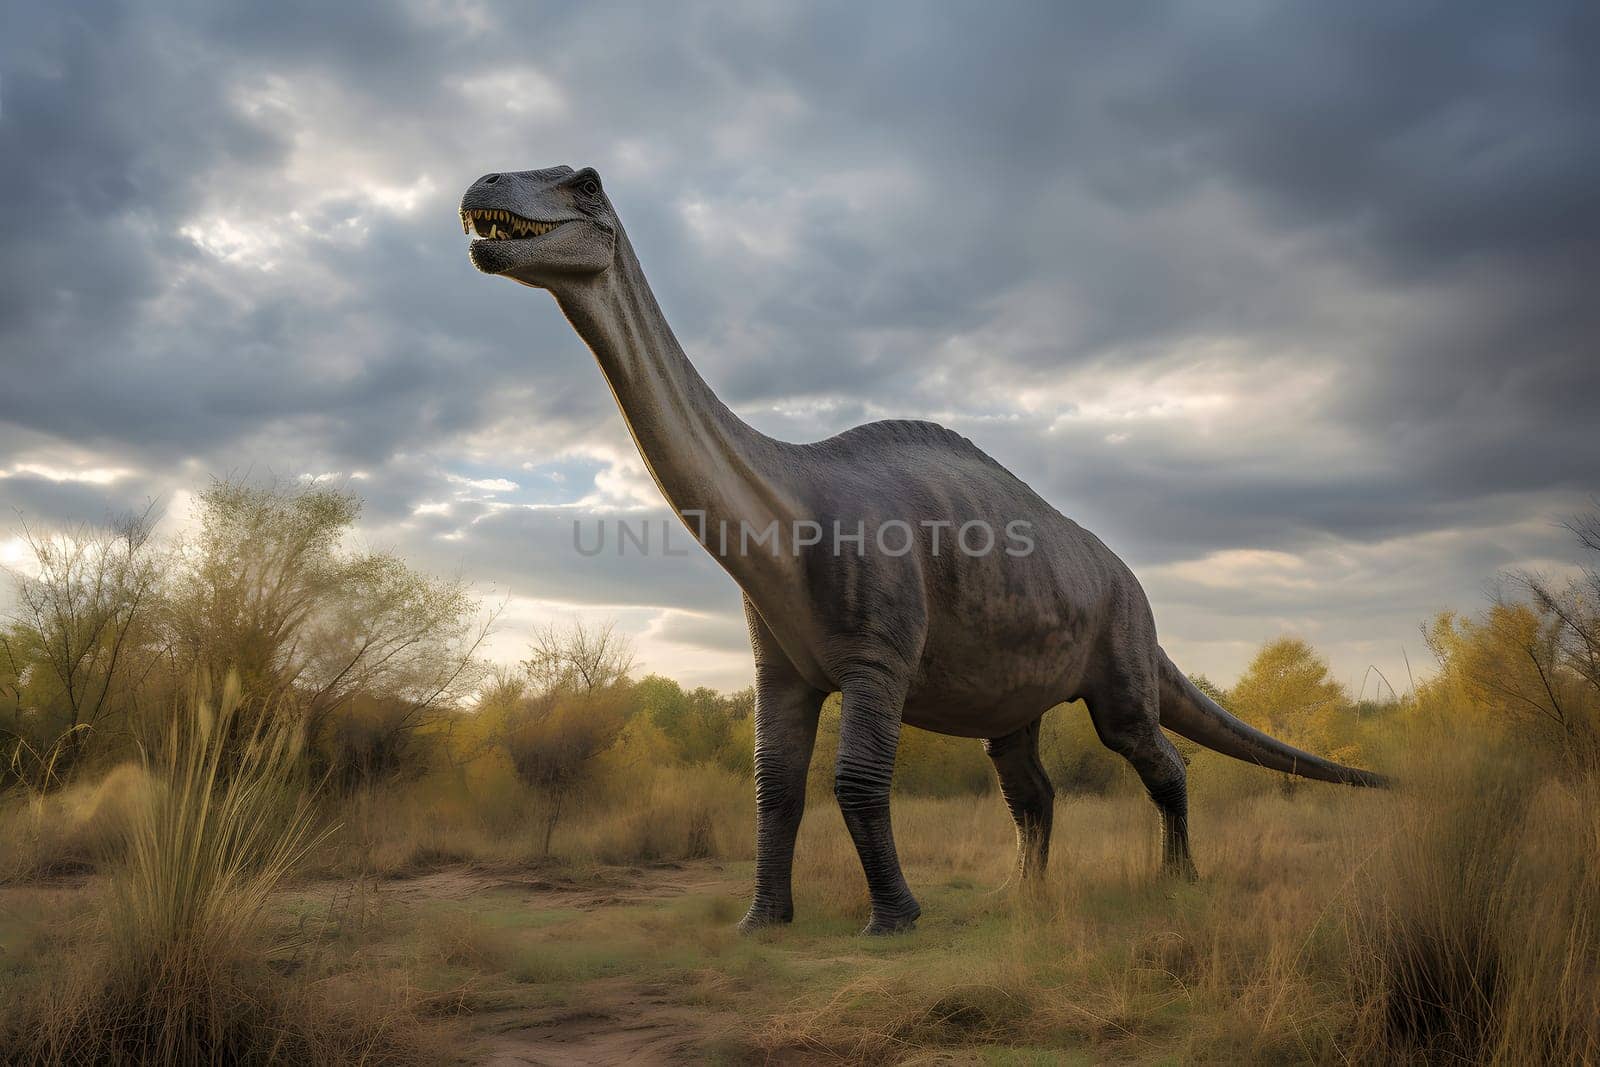 Brontosaurus wide angle view full body portrait at summer day light, neural network generated photorealistic image by z1b